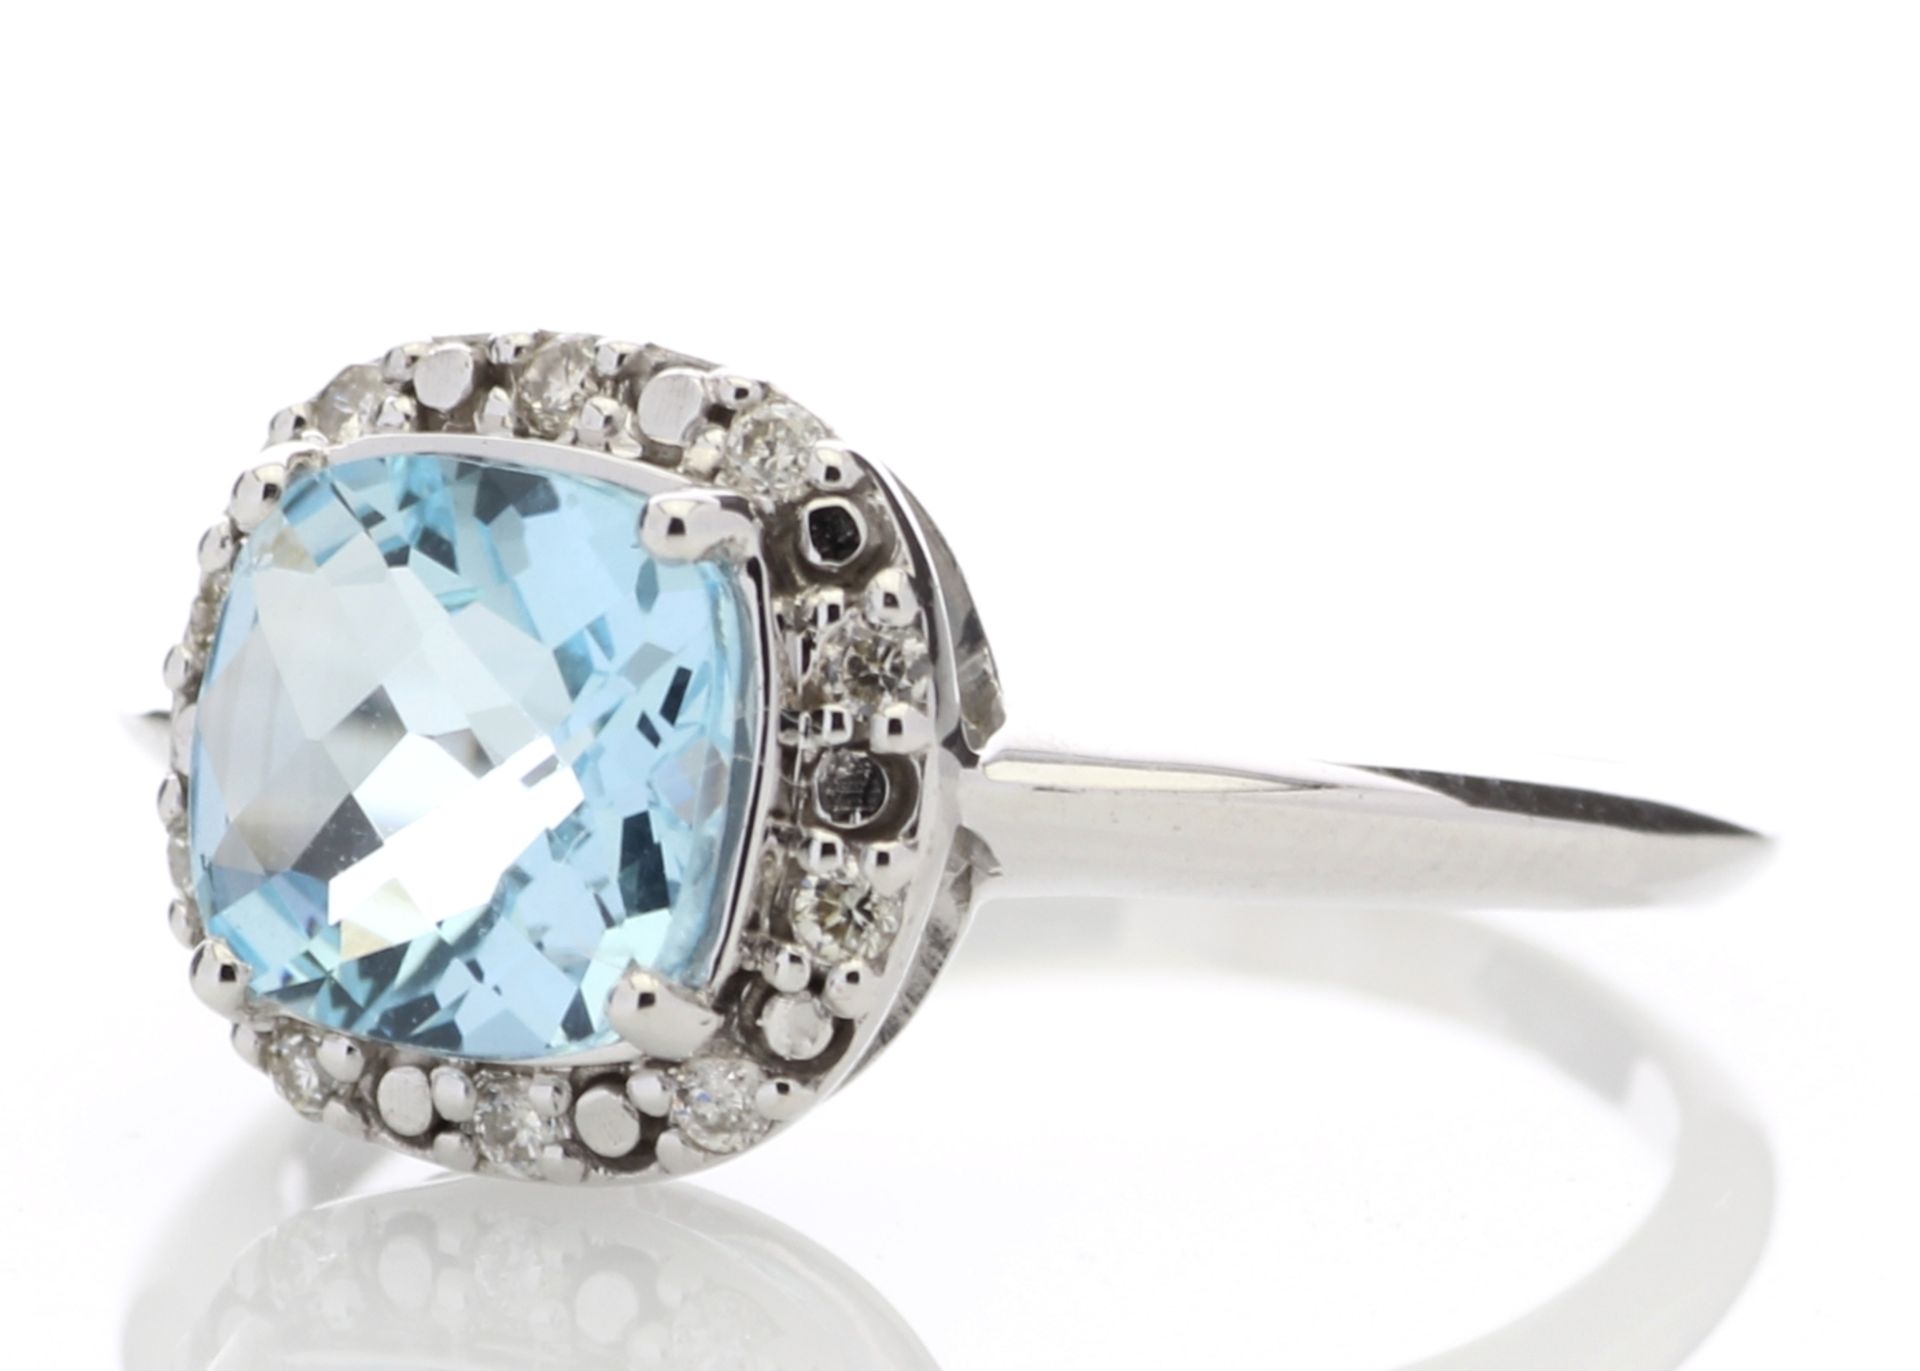 9ct White Gold Diamond And Blue Topaz Ring (BT1.79) 0.10 Carats - Valued By GIE £1,920.00 - A - Image 2 of 10